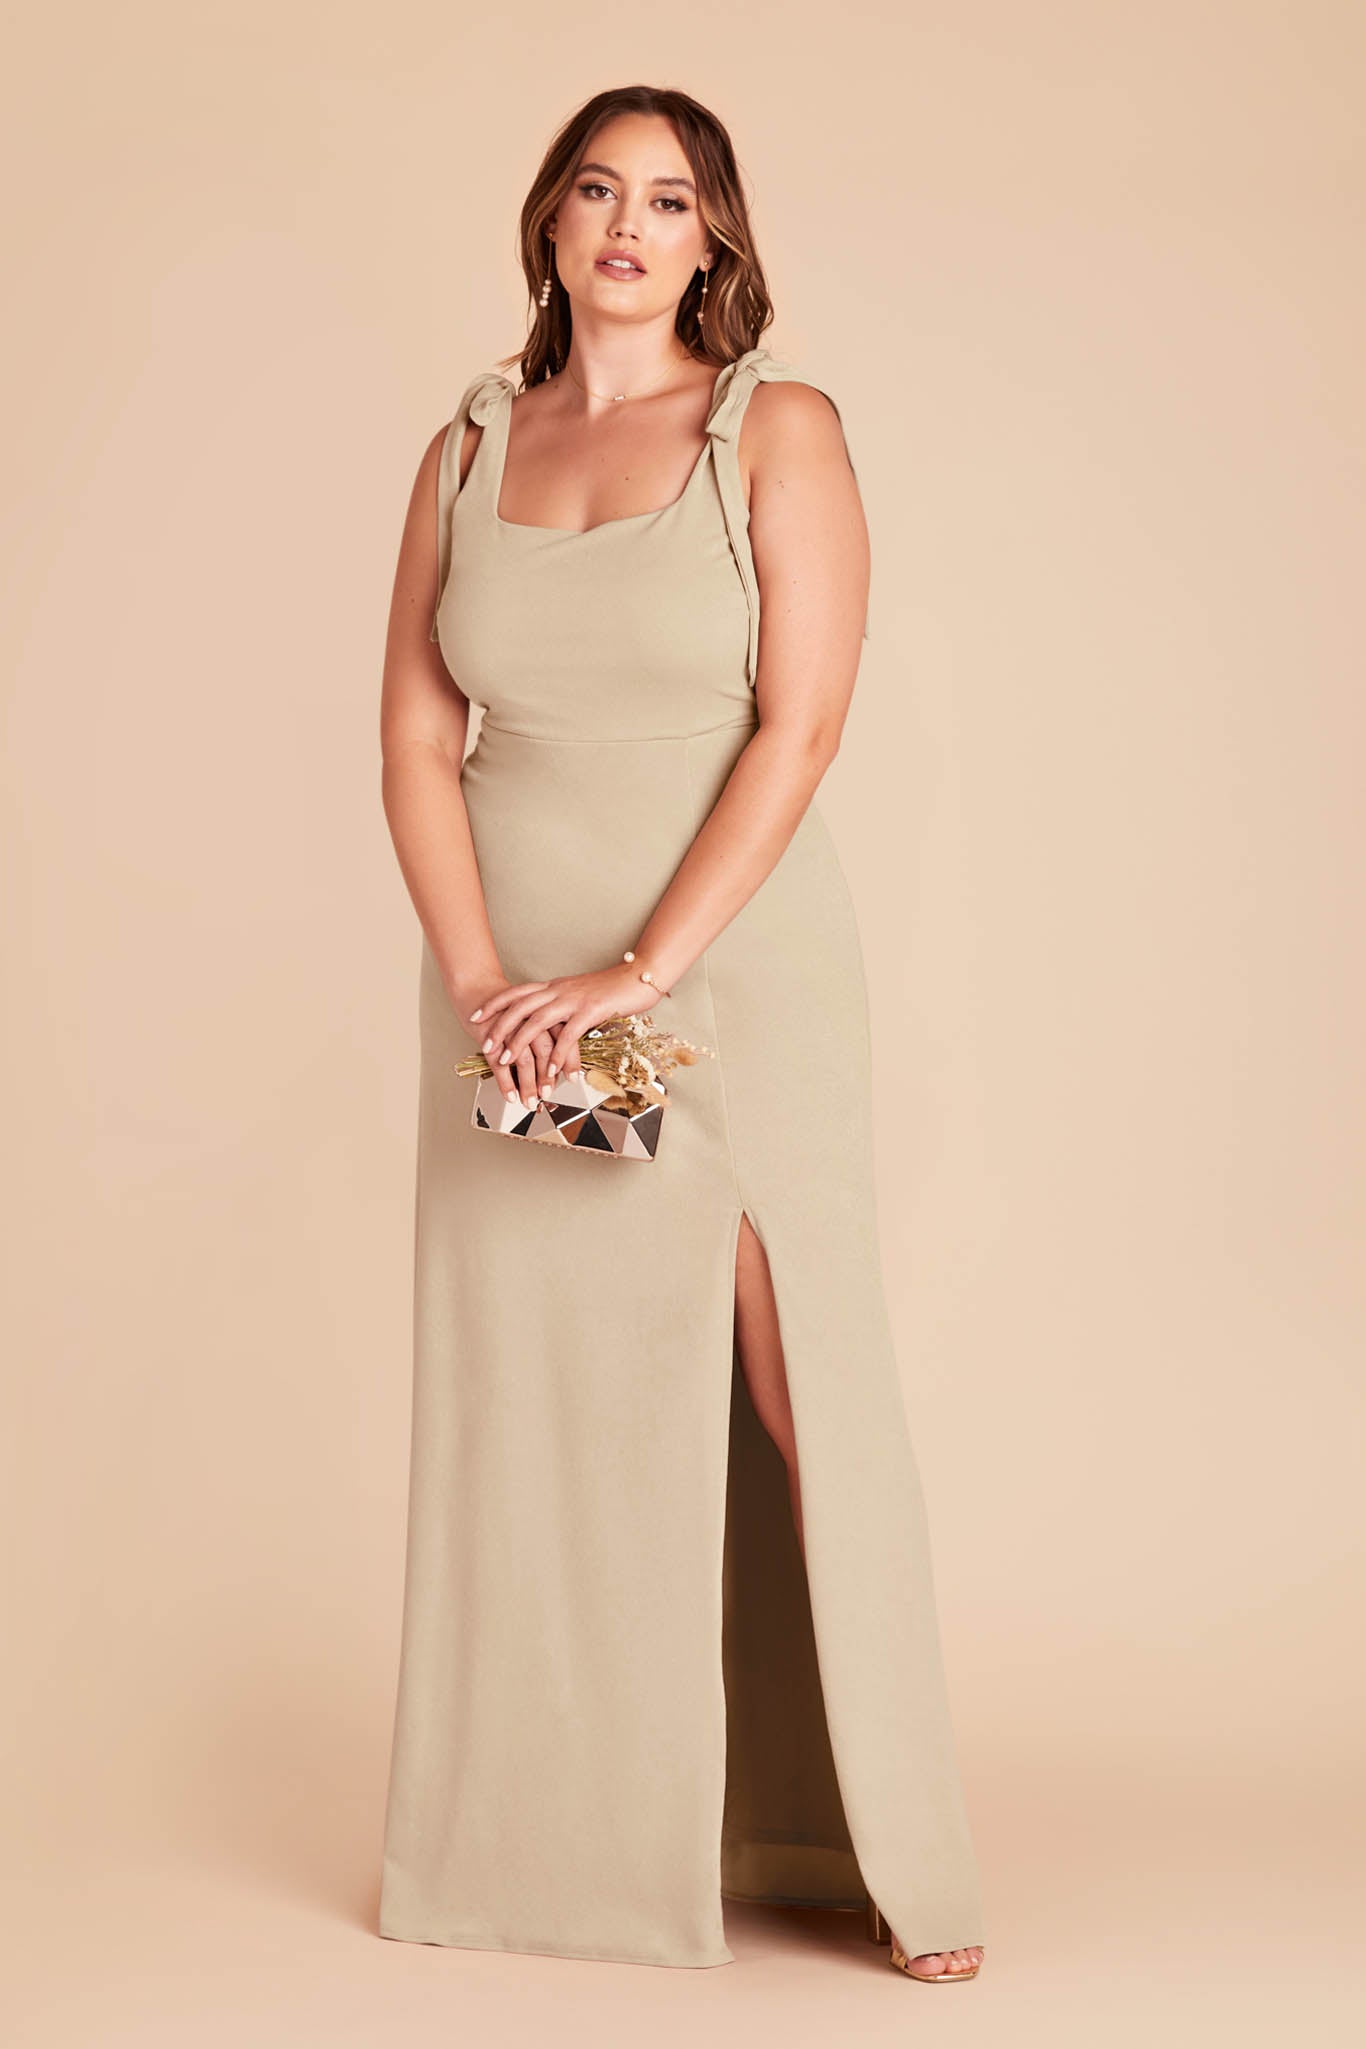 Neutral Champagne Alex Convertible Dress by Birdy Grey